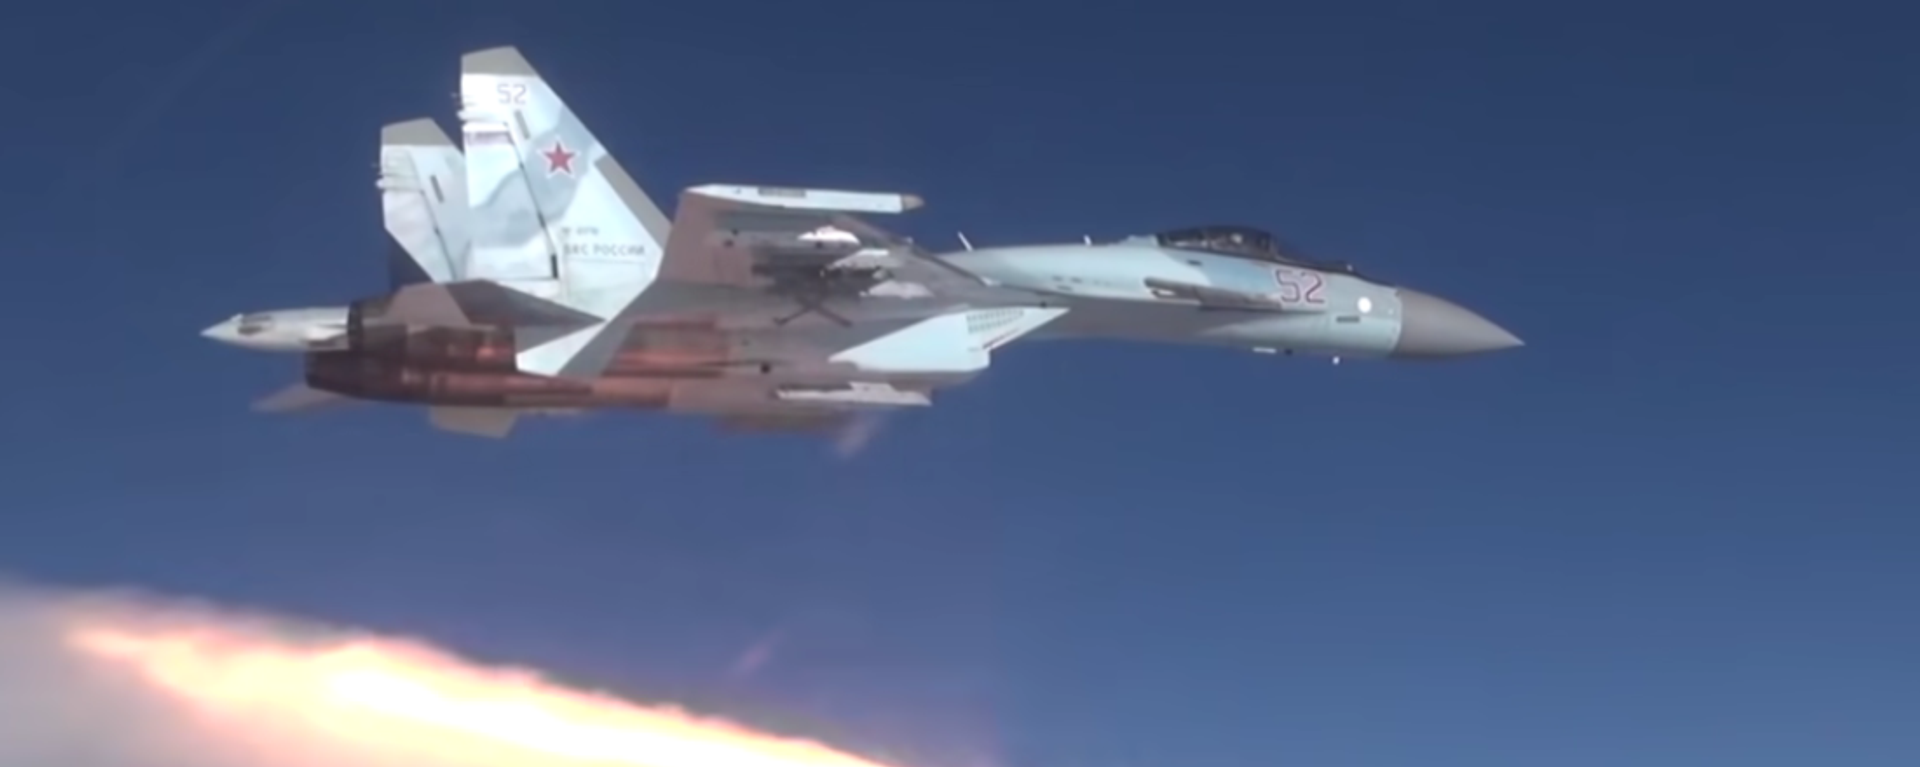 A Russian Su-35S fighter jet fires what appears to be an R-37M ultra-long-range air-to-air missile in a promotional video by the Russian Ministry of Defense - Sputnik International, 1920, 03.01.2024